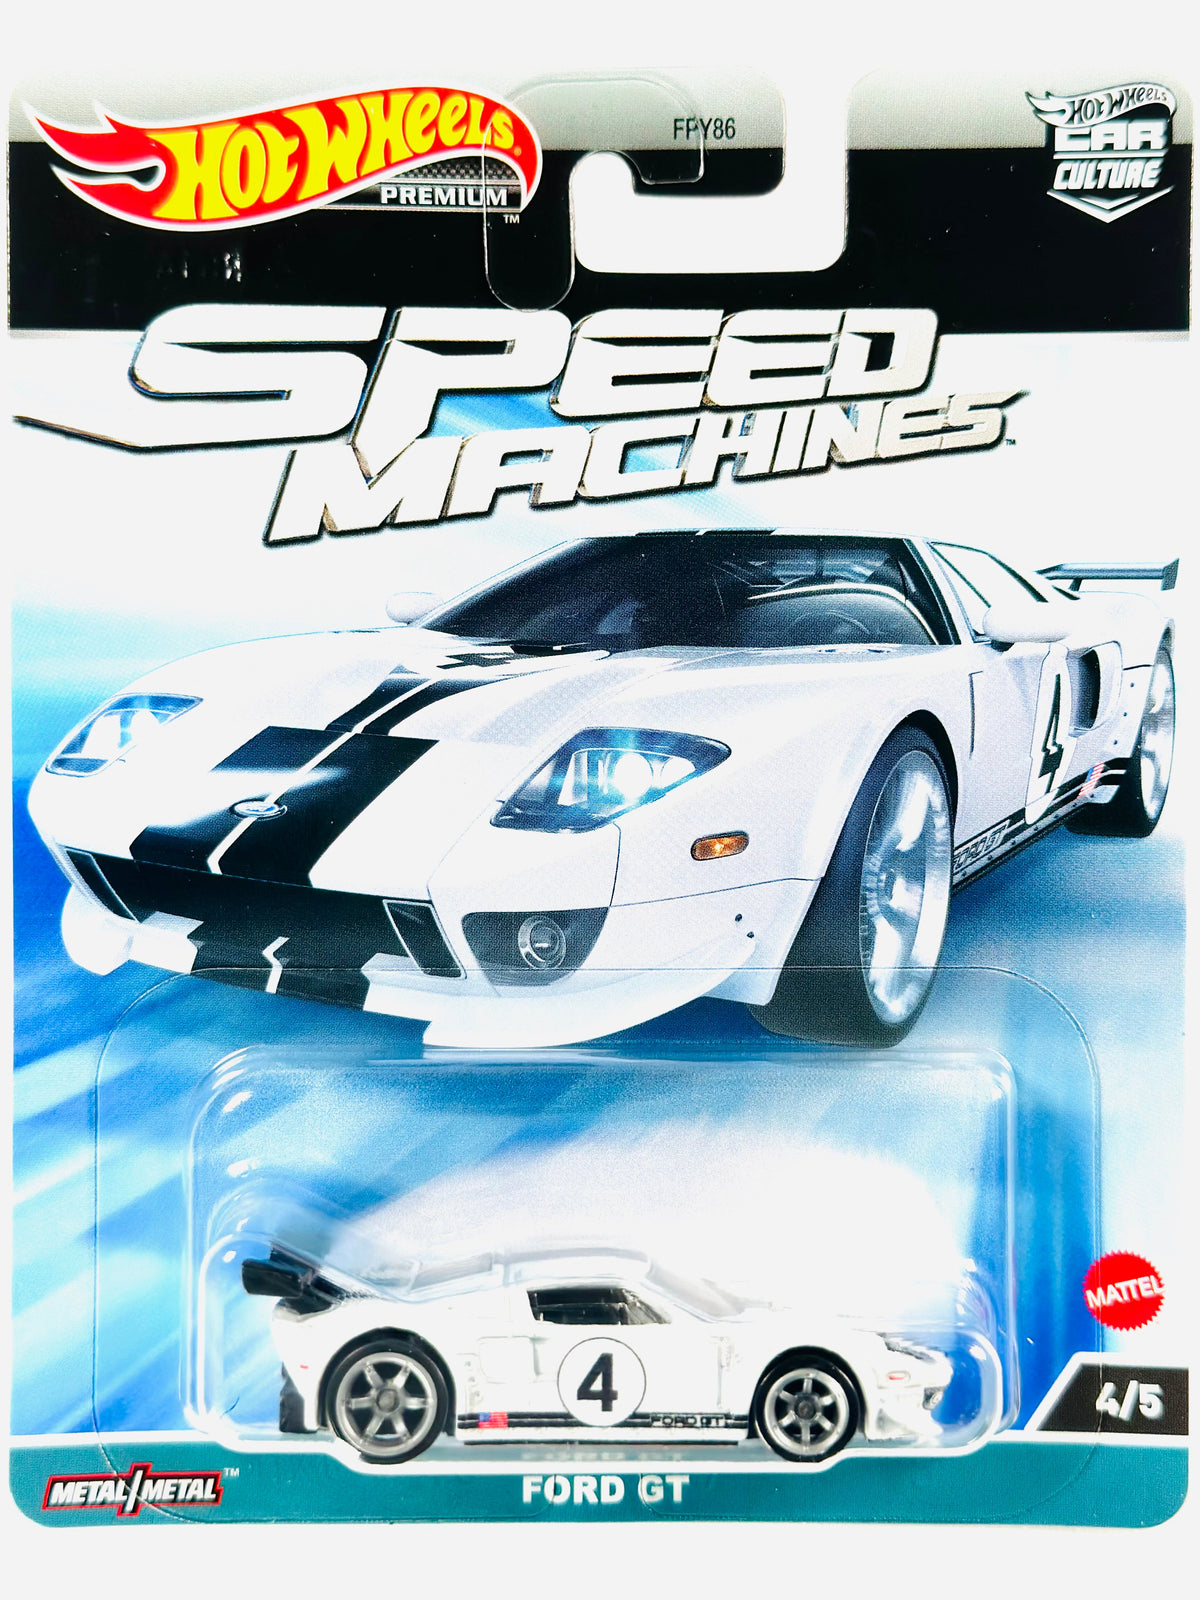 m.media-/images/W/MEDIAX_792452-T2/image, ford gt gran turismo hot wheels 